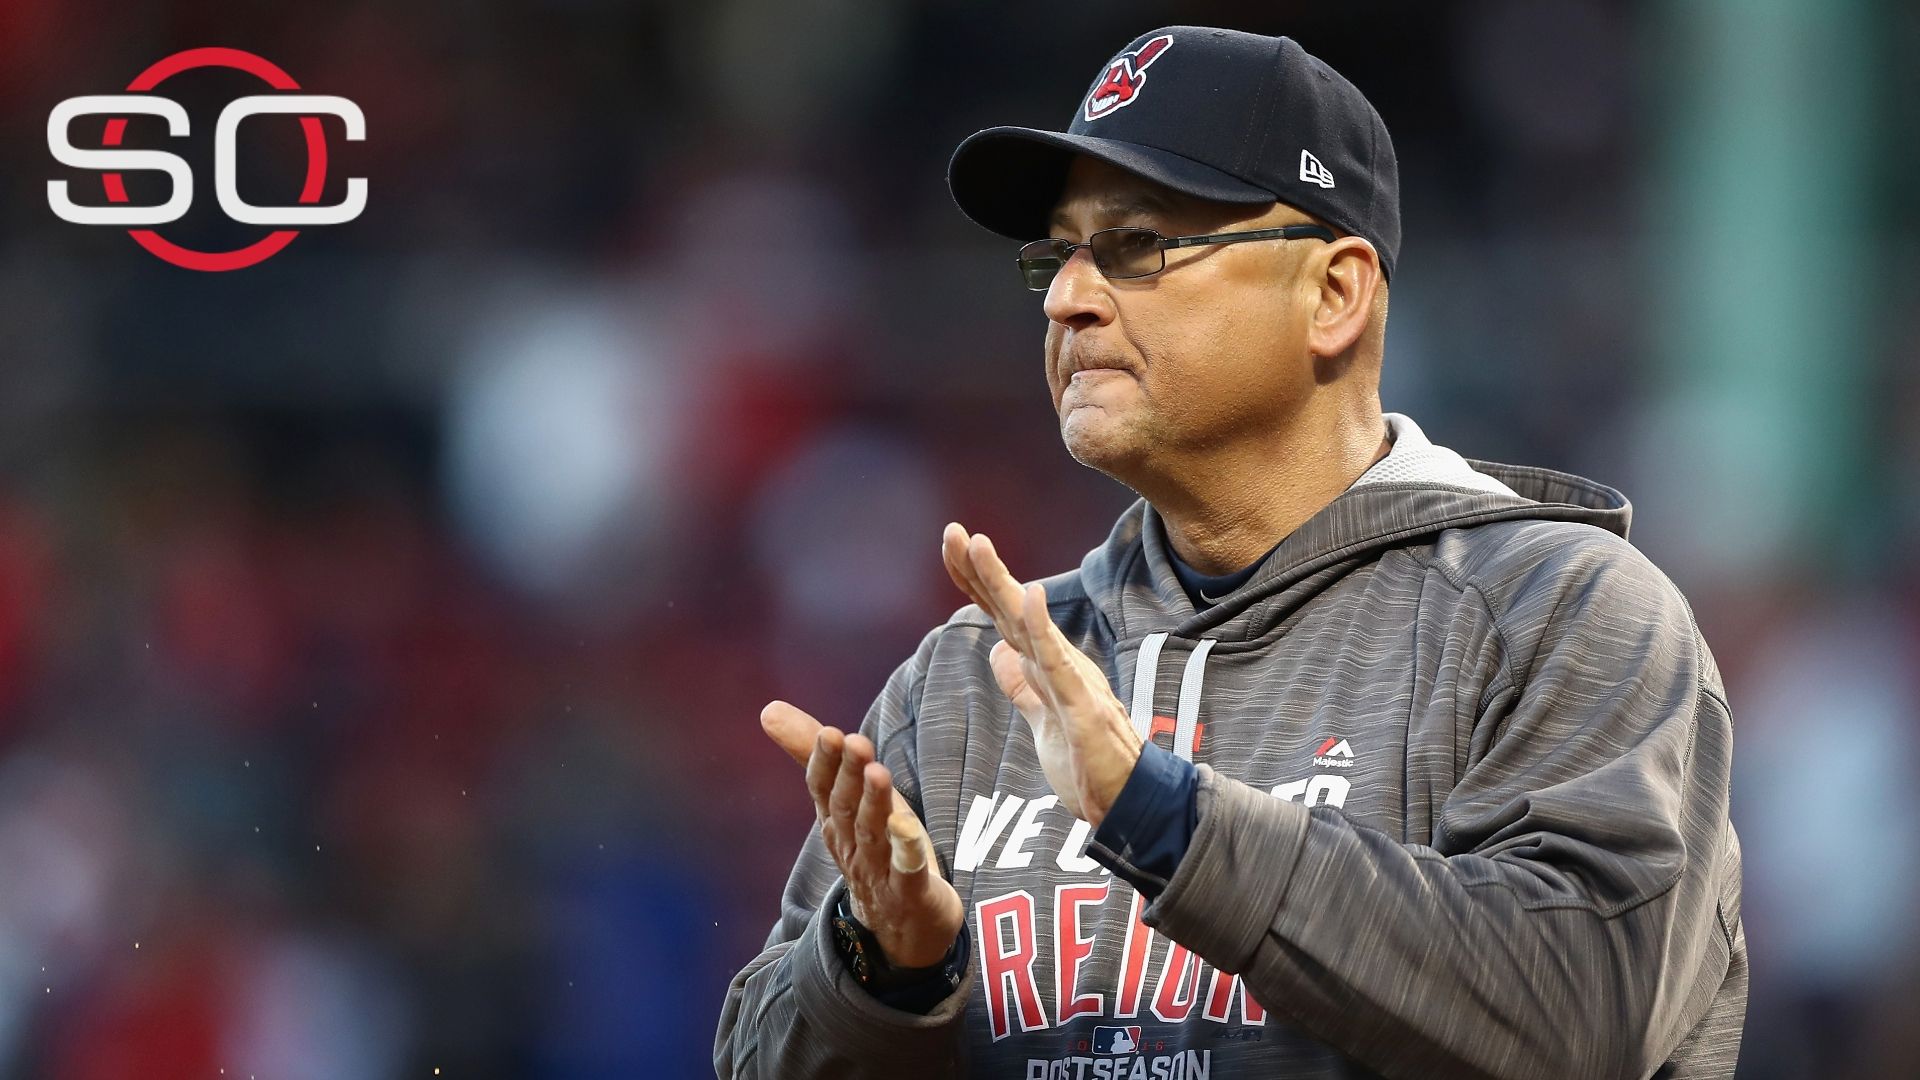 Francona considers Manager of Year honor a team award